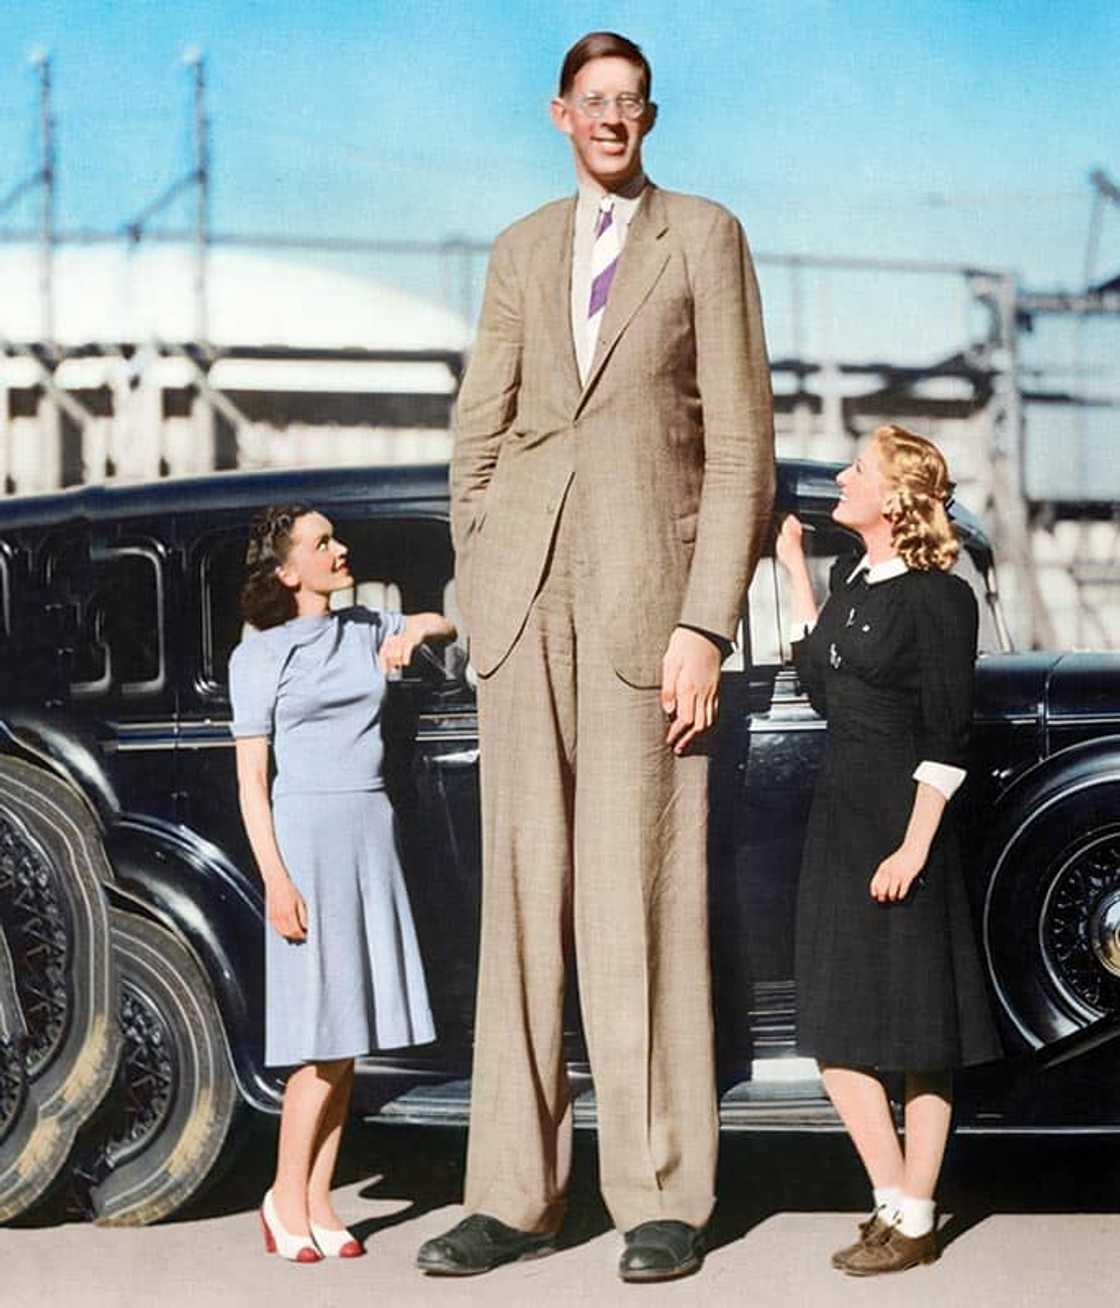 the most tallest man in the world